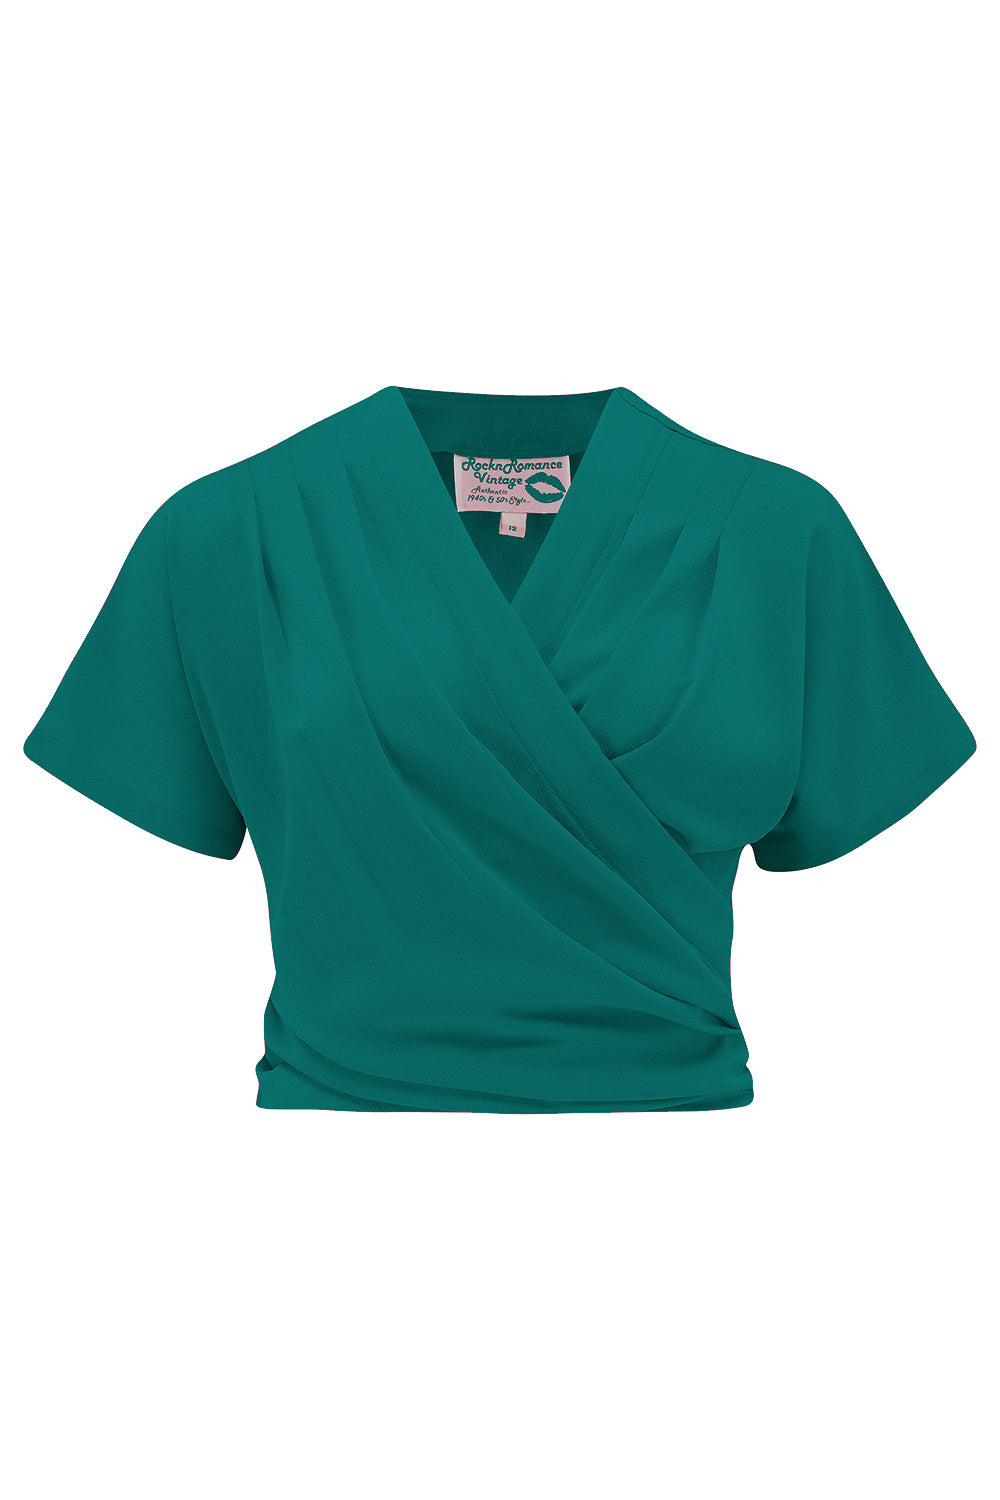 The "Darla" Short Sleeve Wrap Blouse in Teal, True Vintage Style